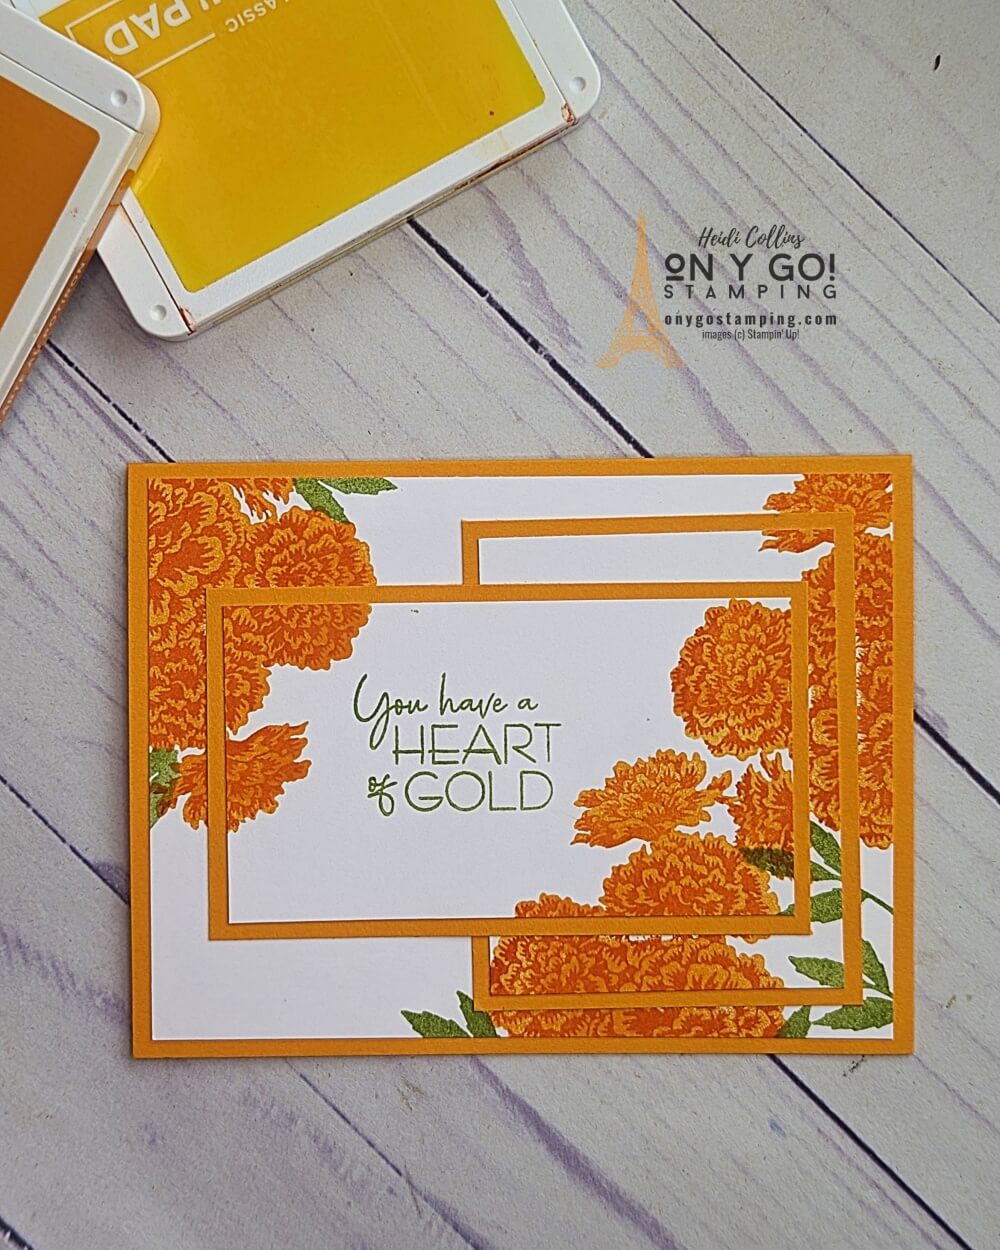 Do you want to learn an easy rubber stamping technique to quickly create beautiful cards with the Marigold Moments stamp set? We’ve got you covered with our Triple Stamping technique! This card making technique requires only minimal supplies, so it’s perfect for beginners. With a little bit of practice and a few simple tools, you’ll be creating beautiful marigold-themed cards in no time!